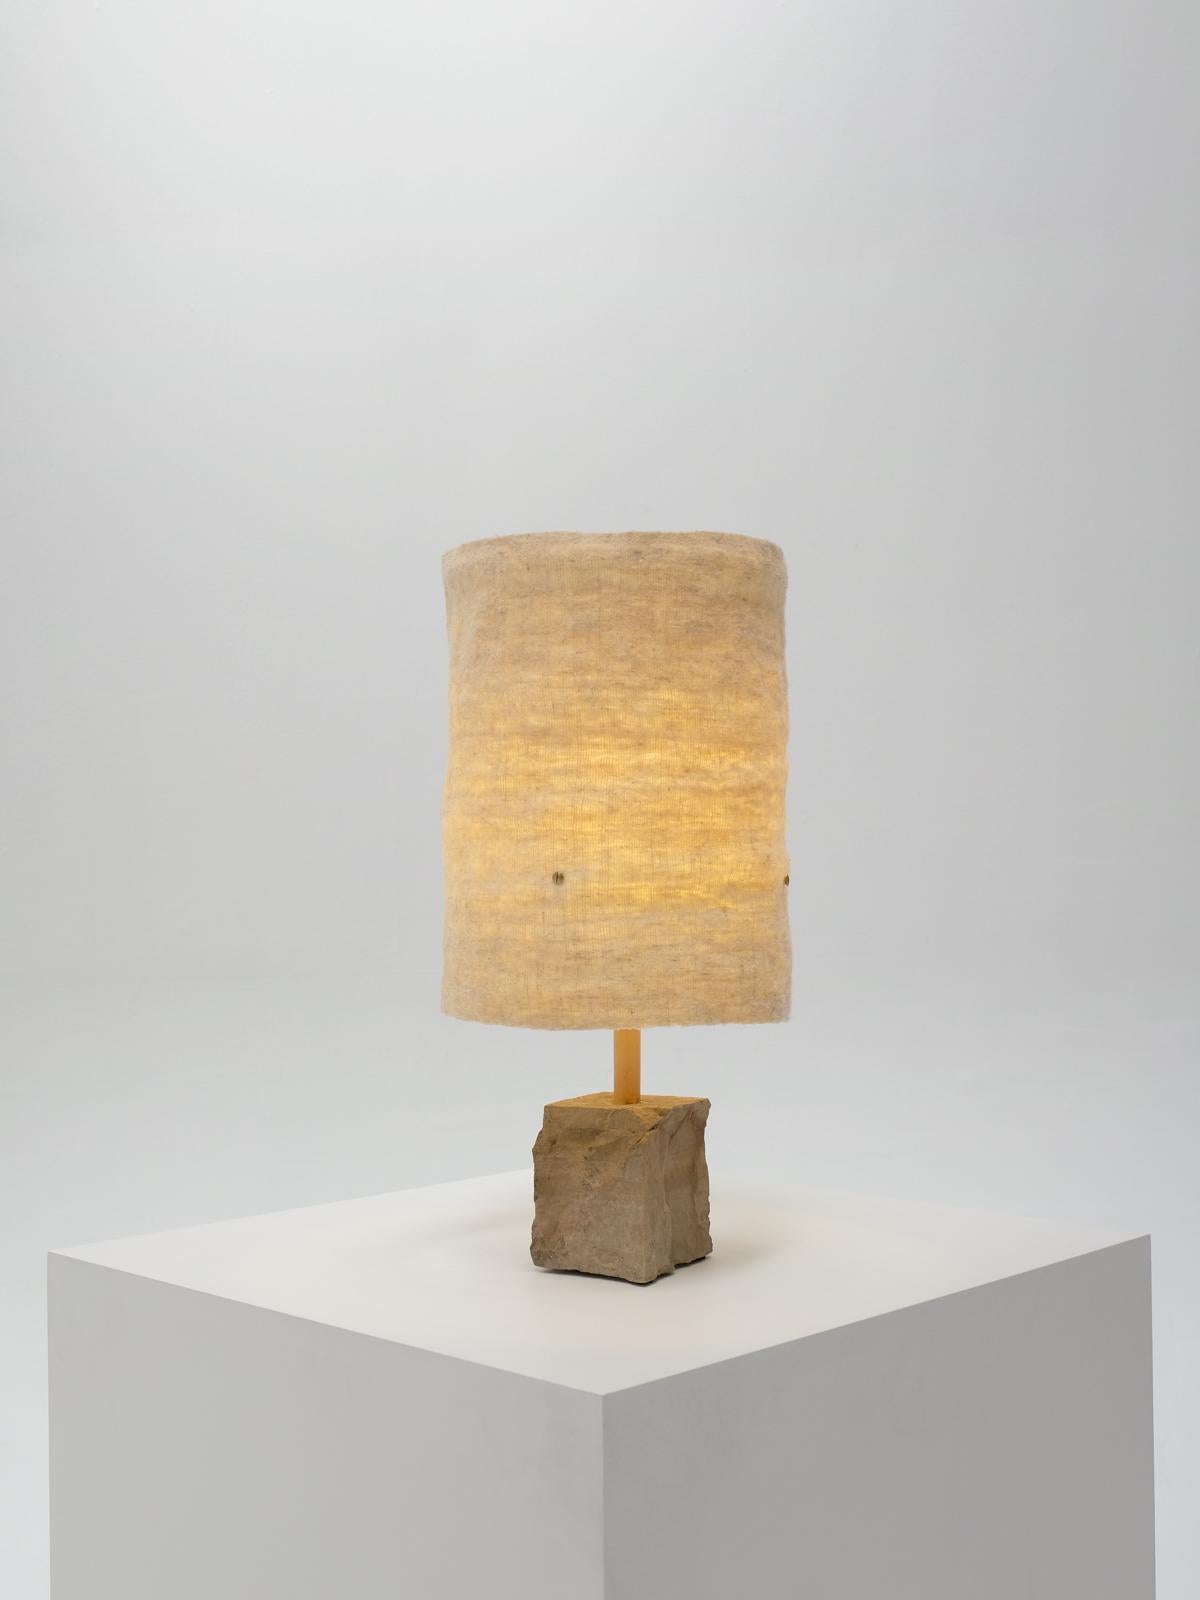 Hand-Crafted Hjra Table Lamp, Handspun and Handwoven wool lampshade, Made of Rock and Reed For Sale